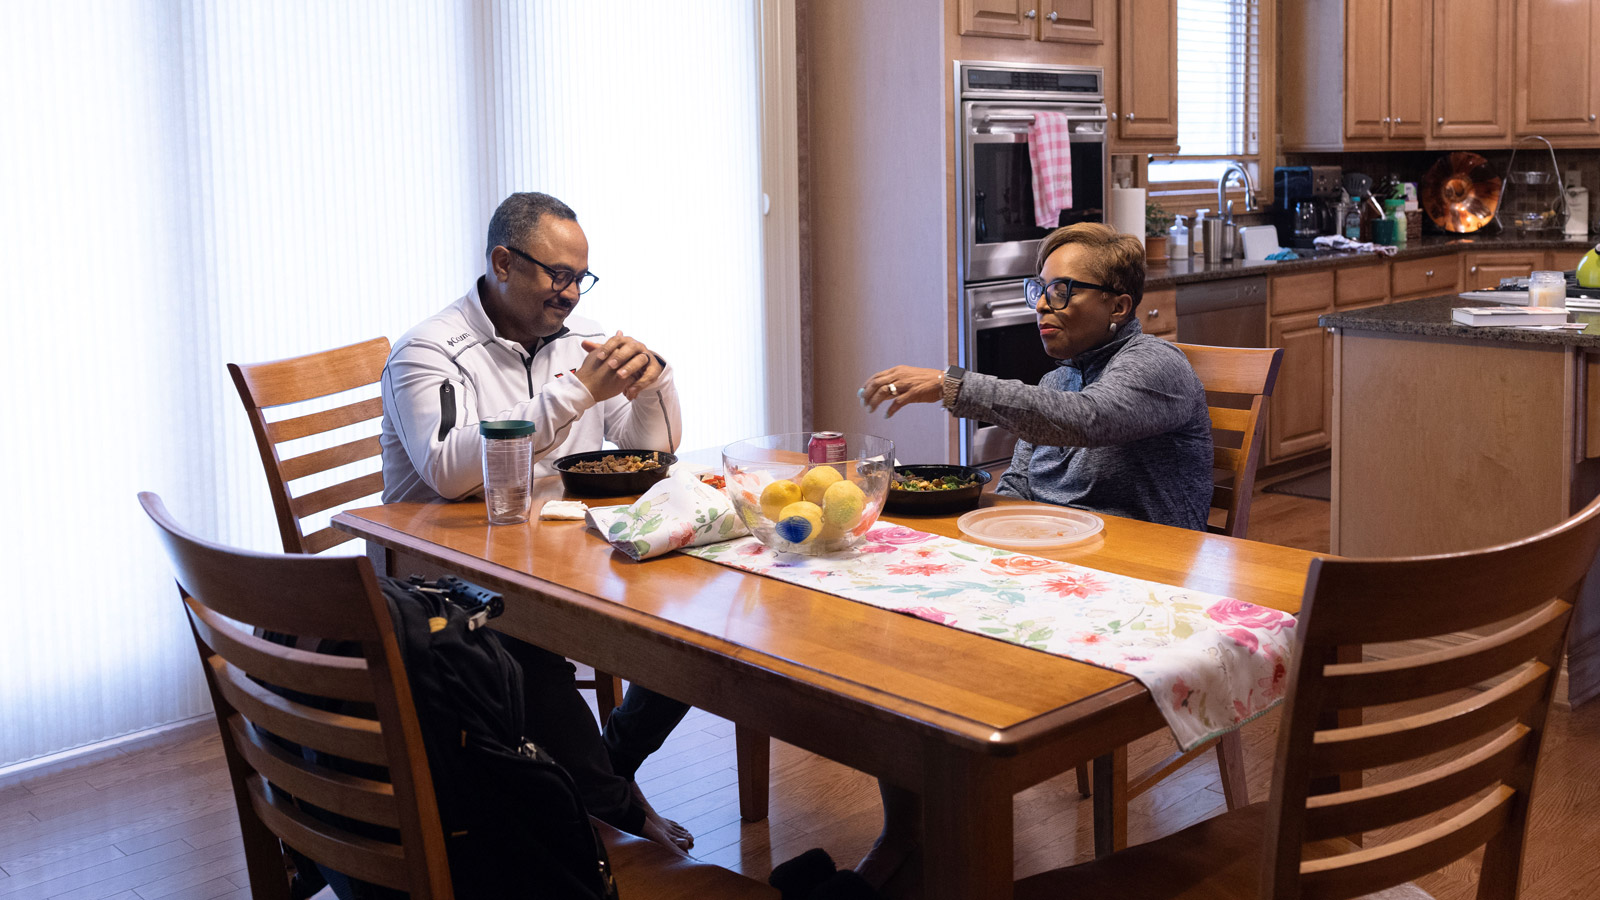 Tracy Turner and her husband, Murvin, eat prepared food (salads or grain bowls-it's hard to tell) at a table next to their kitchen